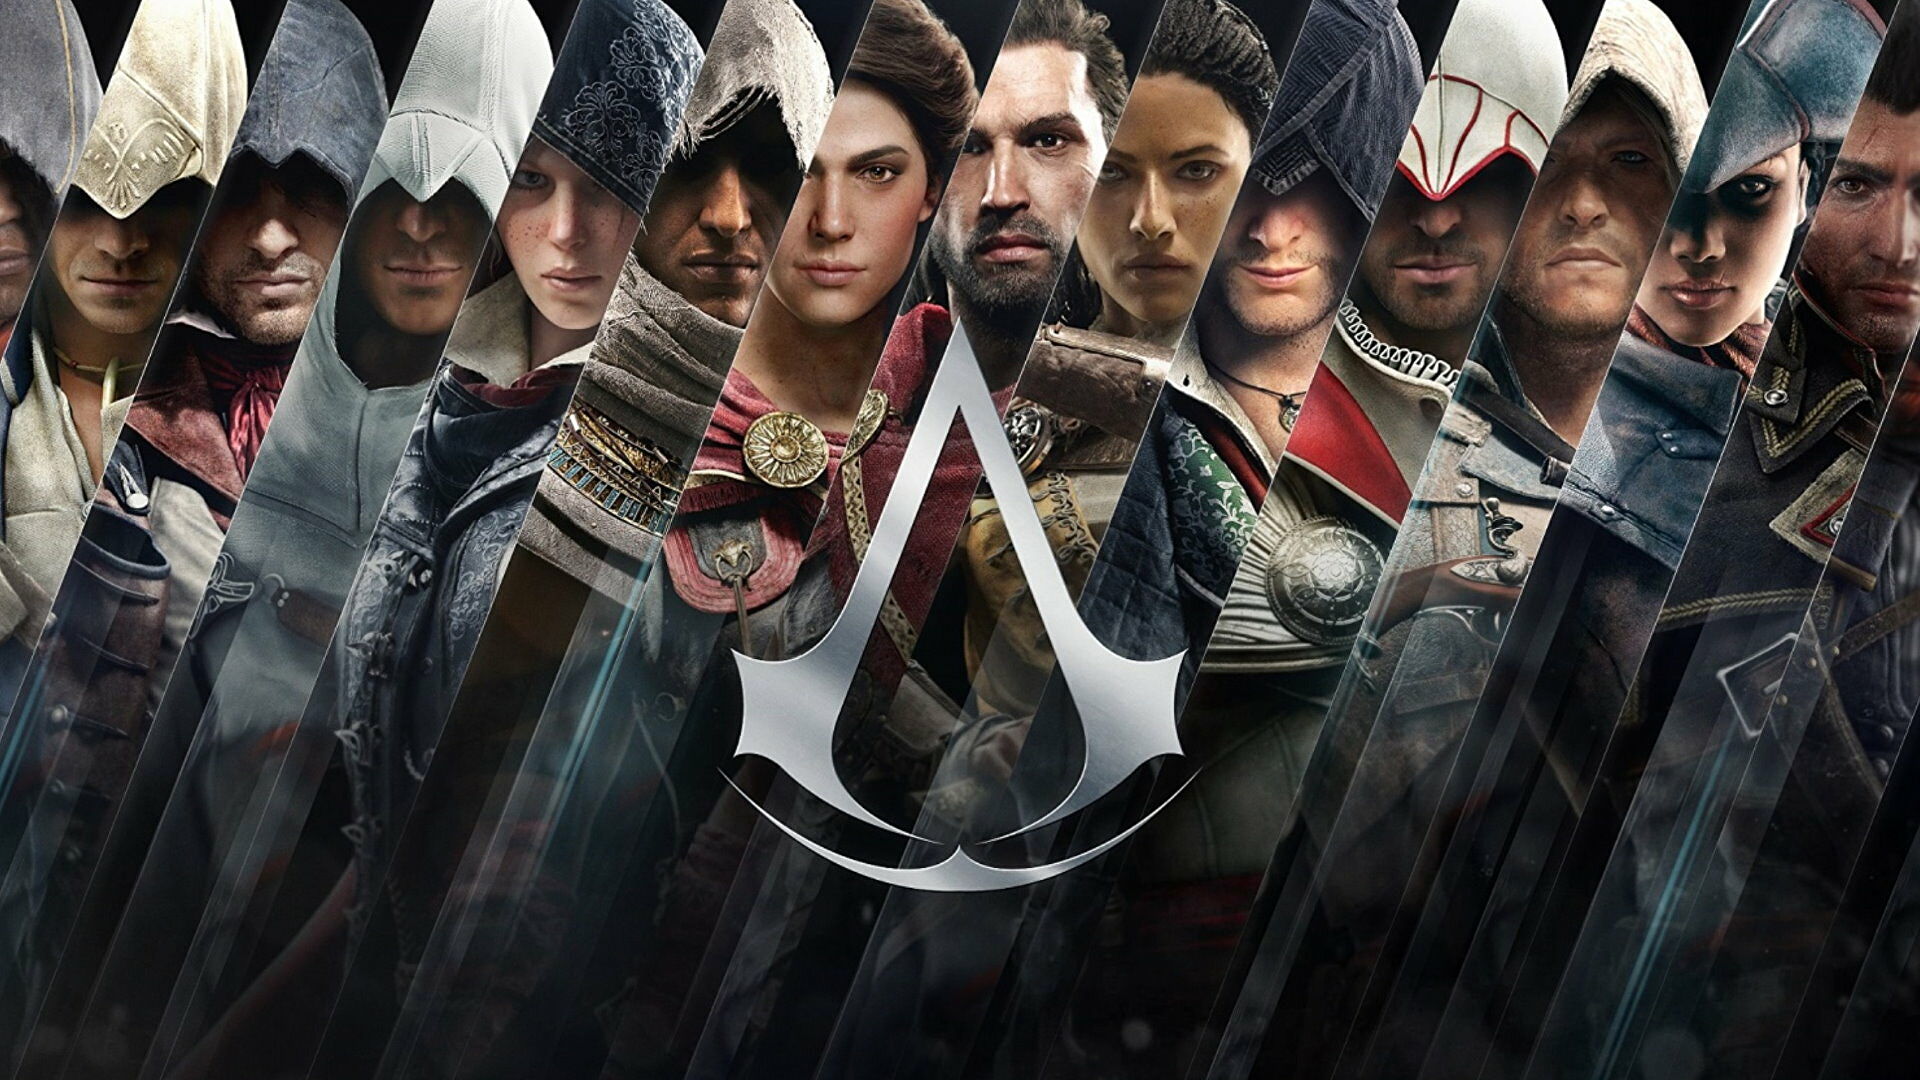 Ubisoft are announcing loads of Assassin’s Creed games on Saturday, leakers claim